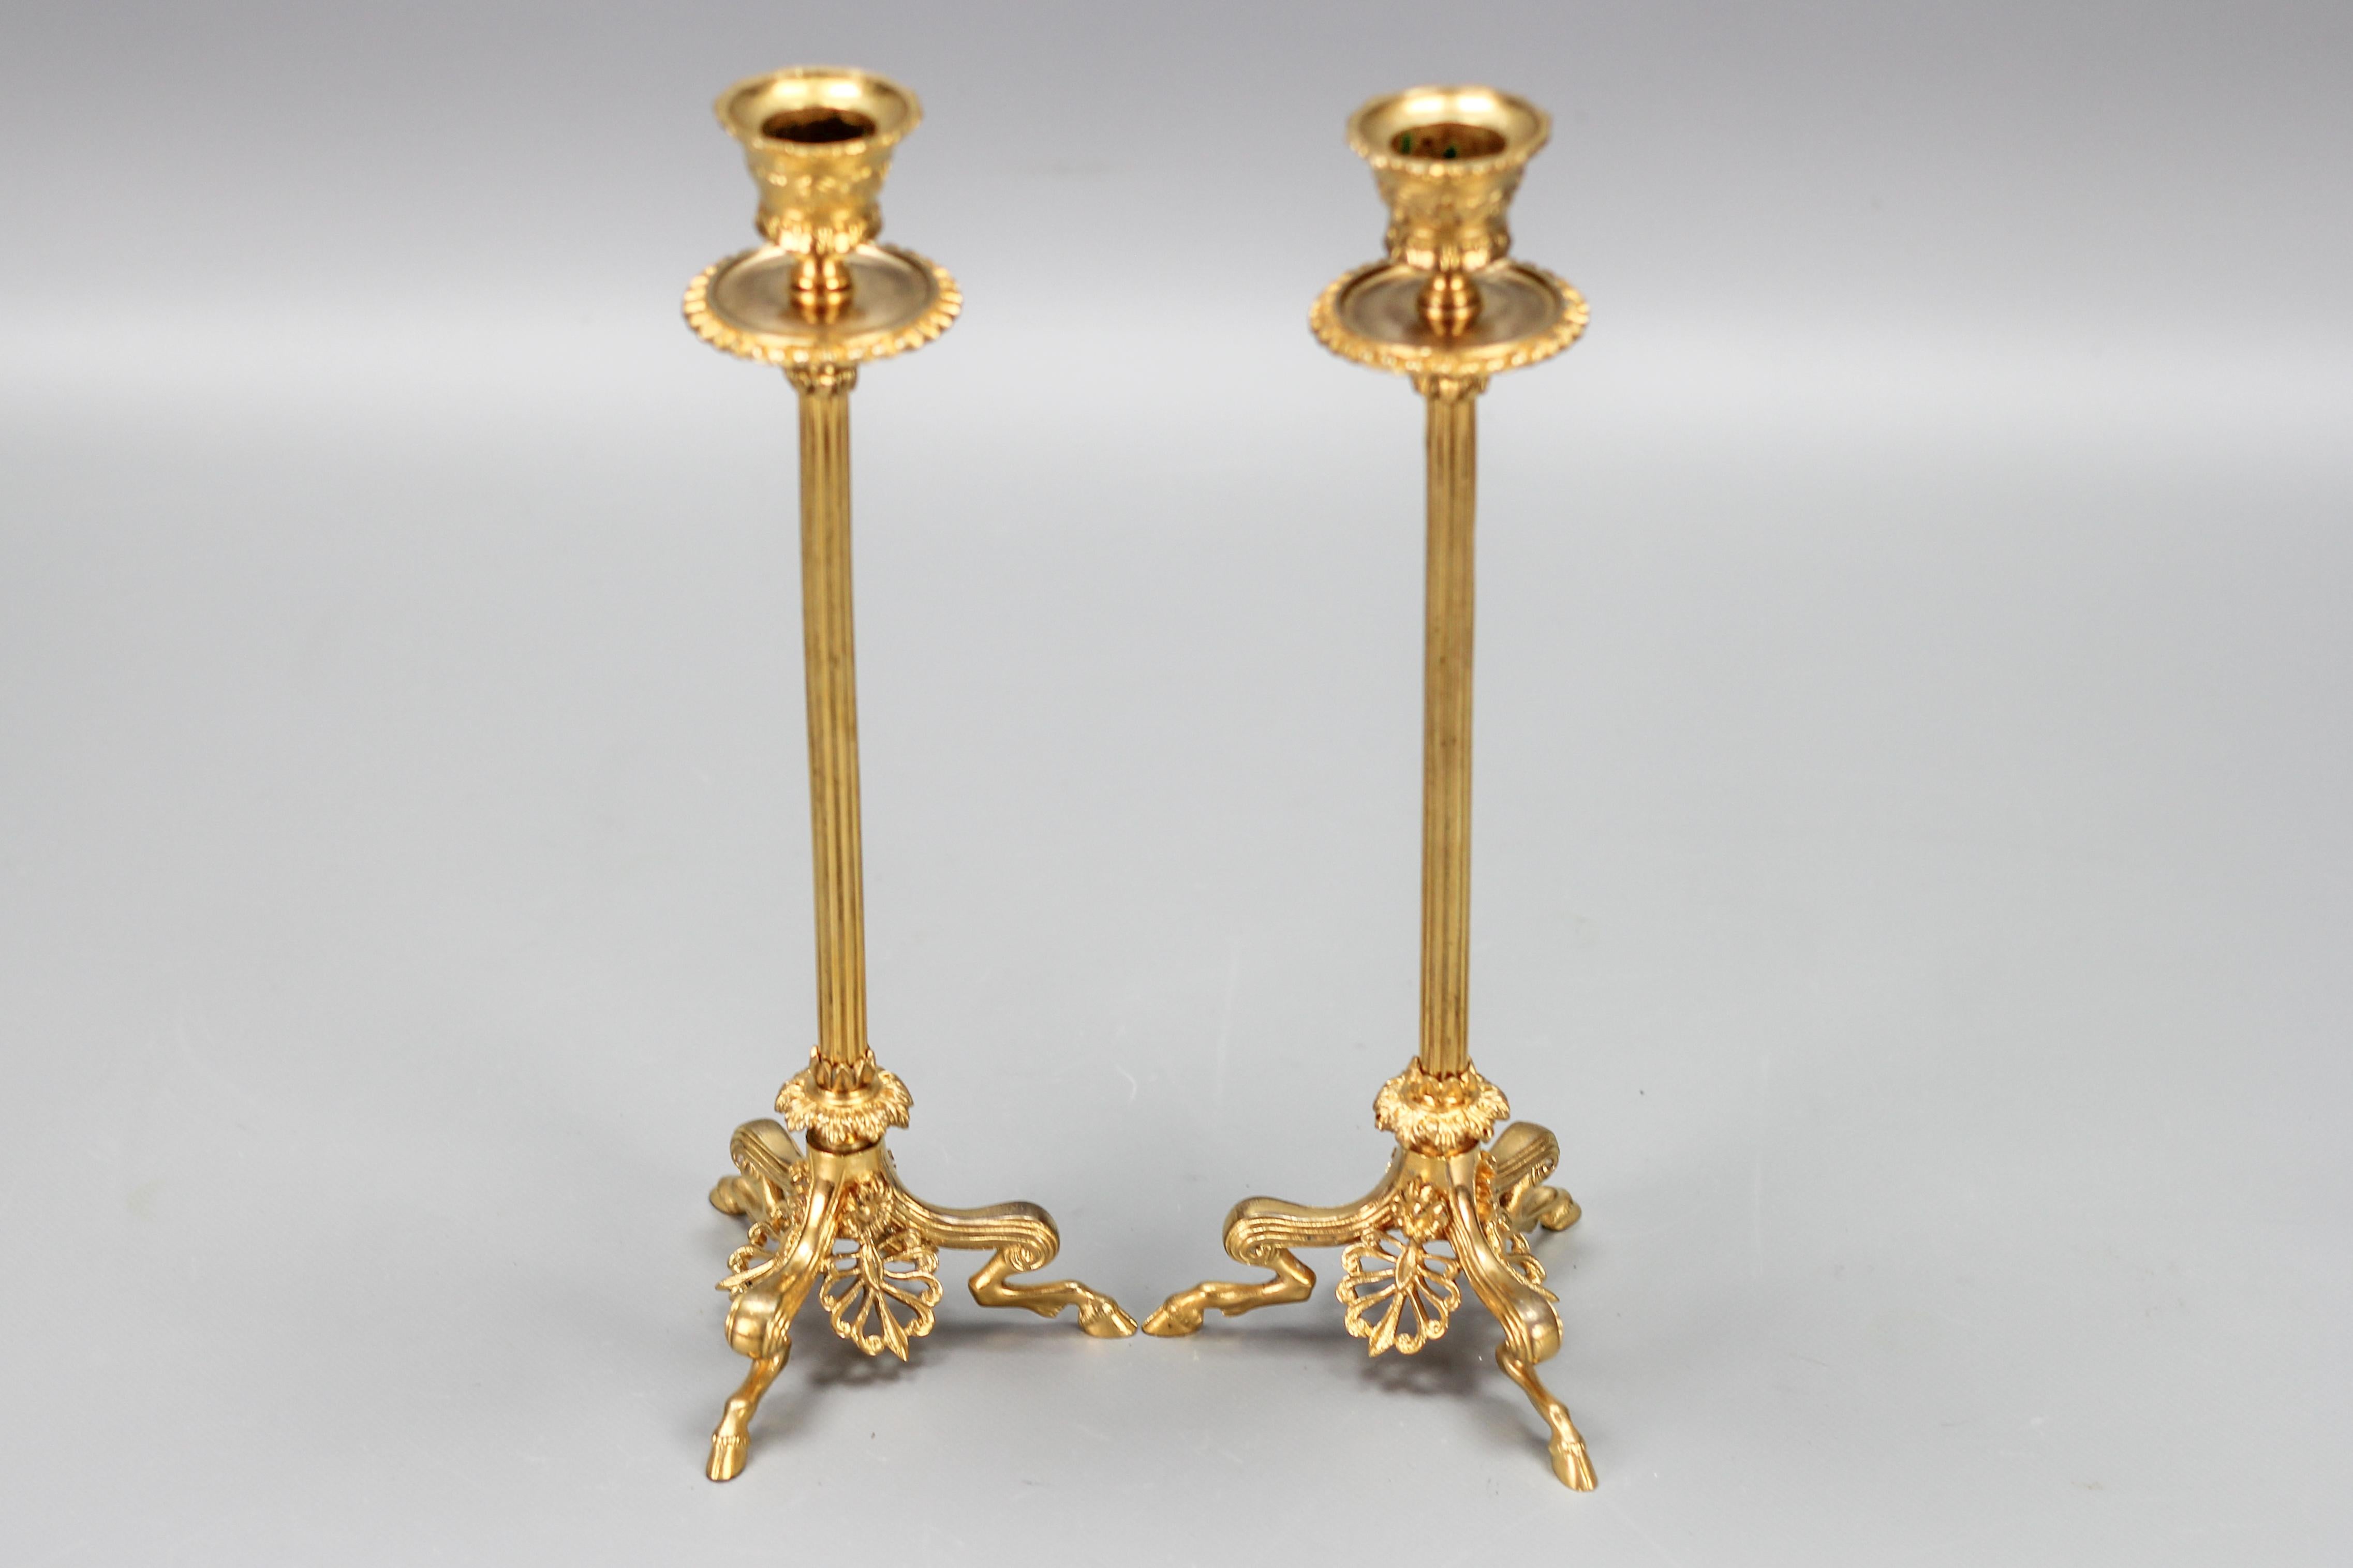 Pair of French Empire Style Gilt Bronze Candlesticks on Hoofed Faun Feet For Sale 2